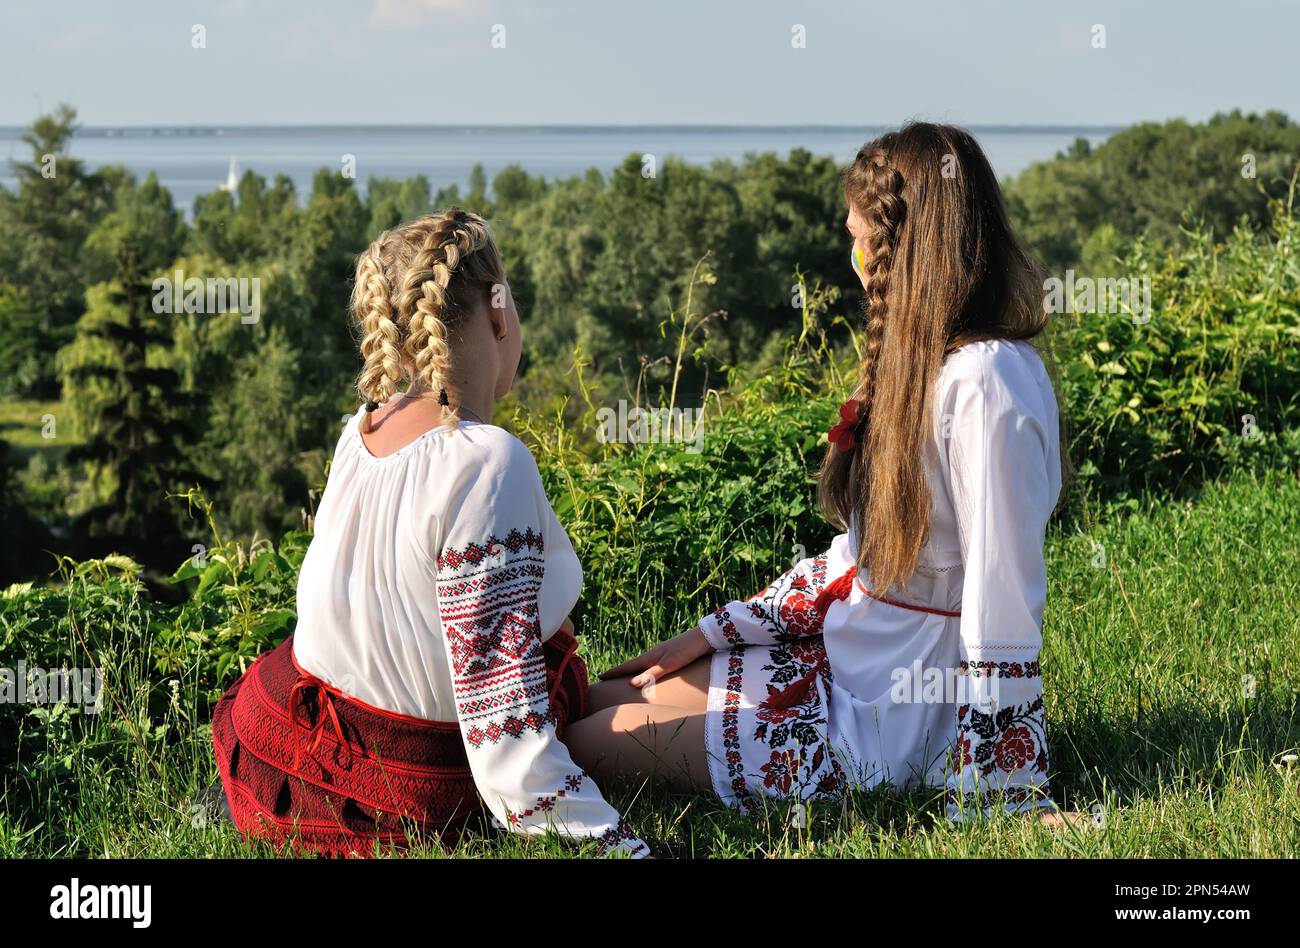 outdoor portrait of two young ukrainian women in traditional ukrainian clothes Stock Photo